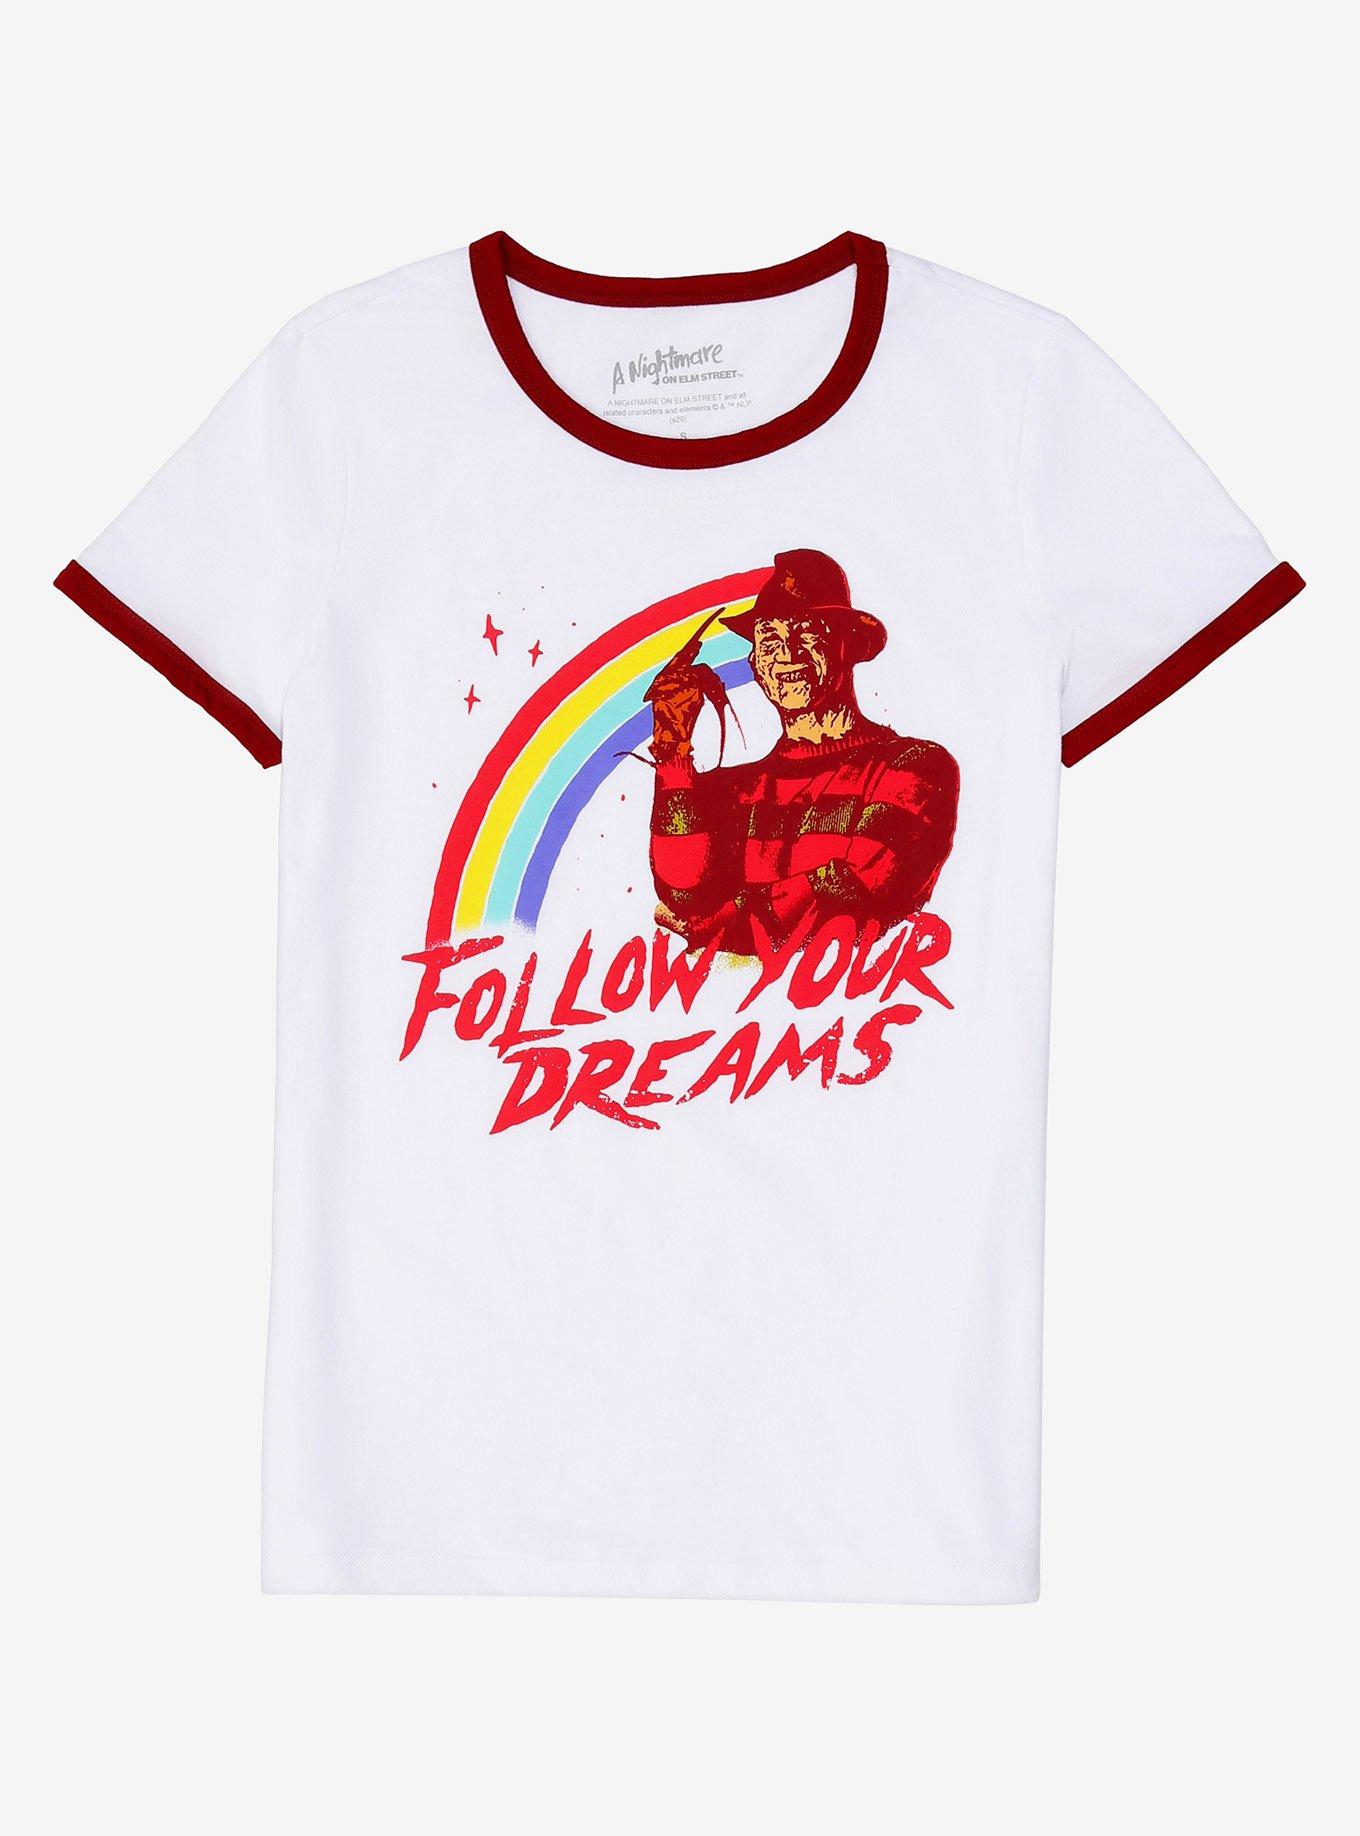 A Nightmare On Elm Street Follow Your Dreams Girls Ringer T-Shirt, WHITE, hi-res